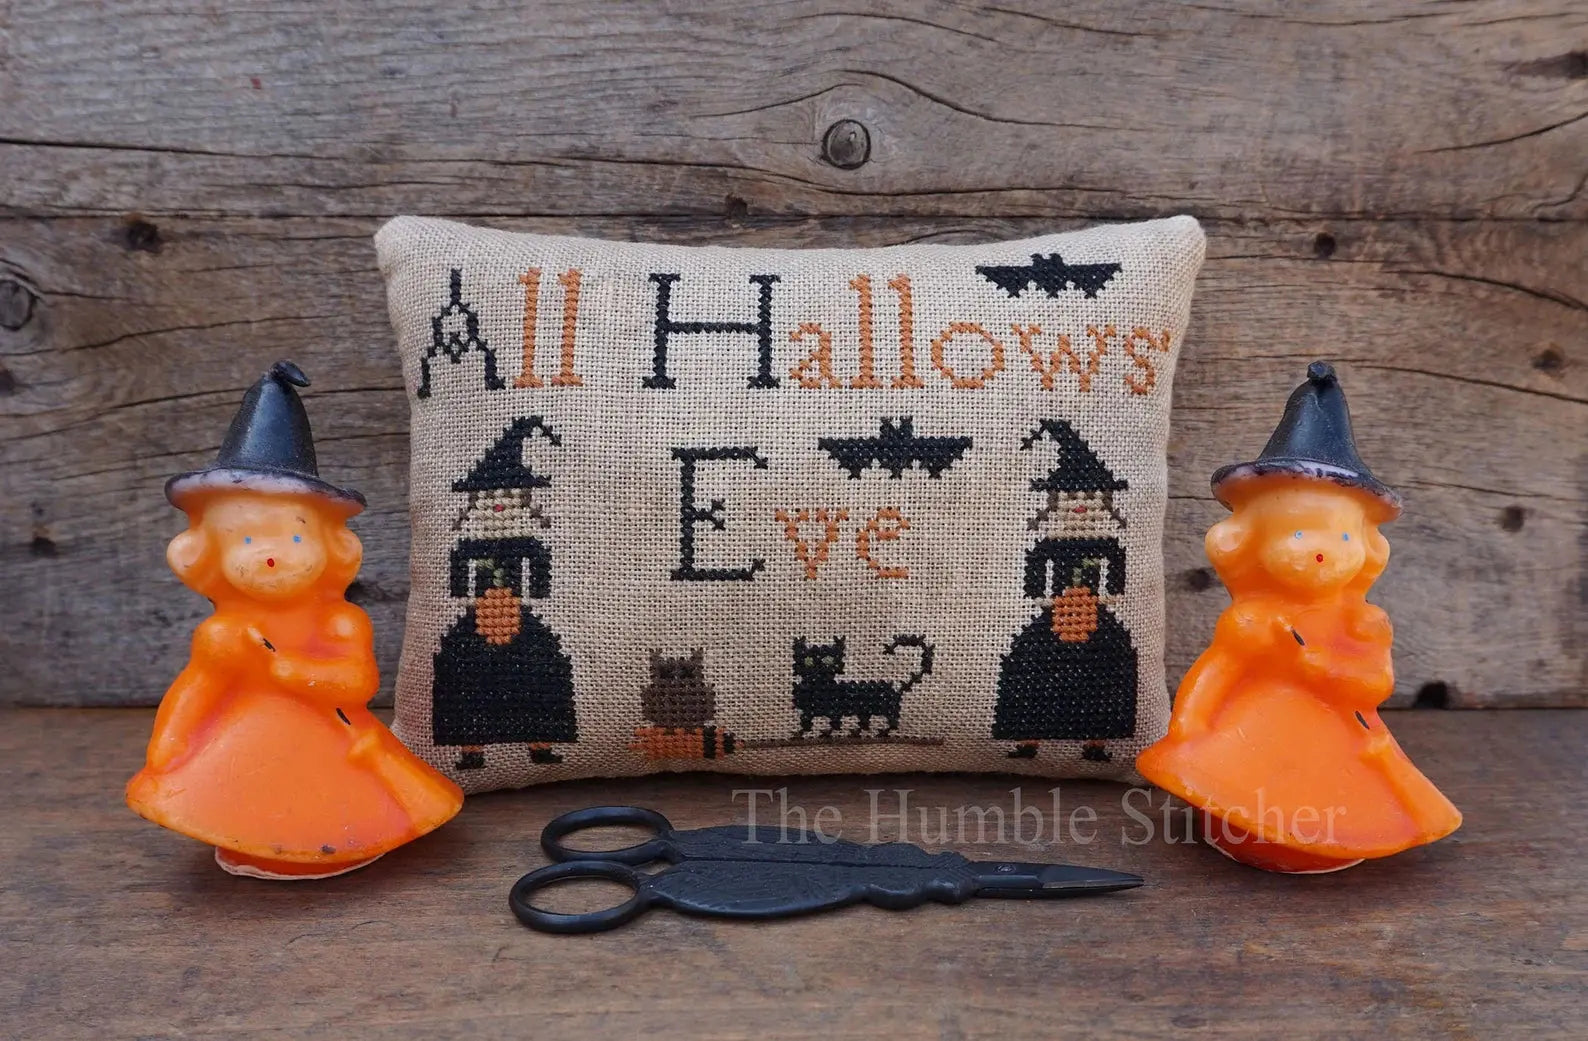 All Hallow's Eve by The Humble Stitcher The Humble Stitcher